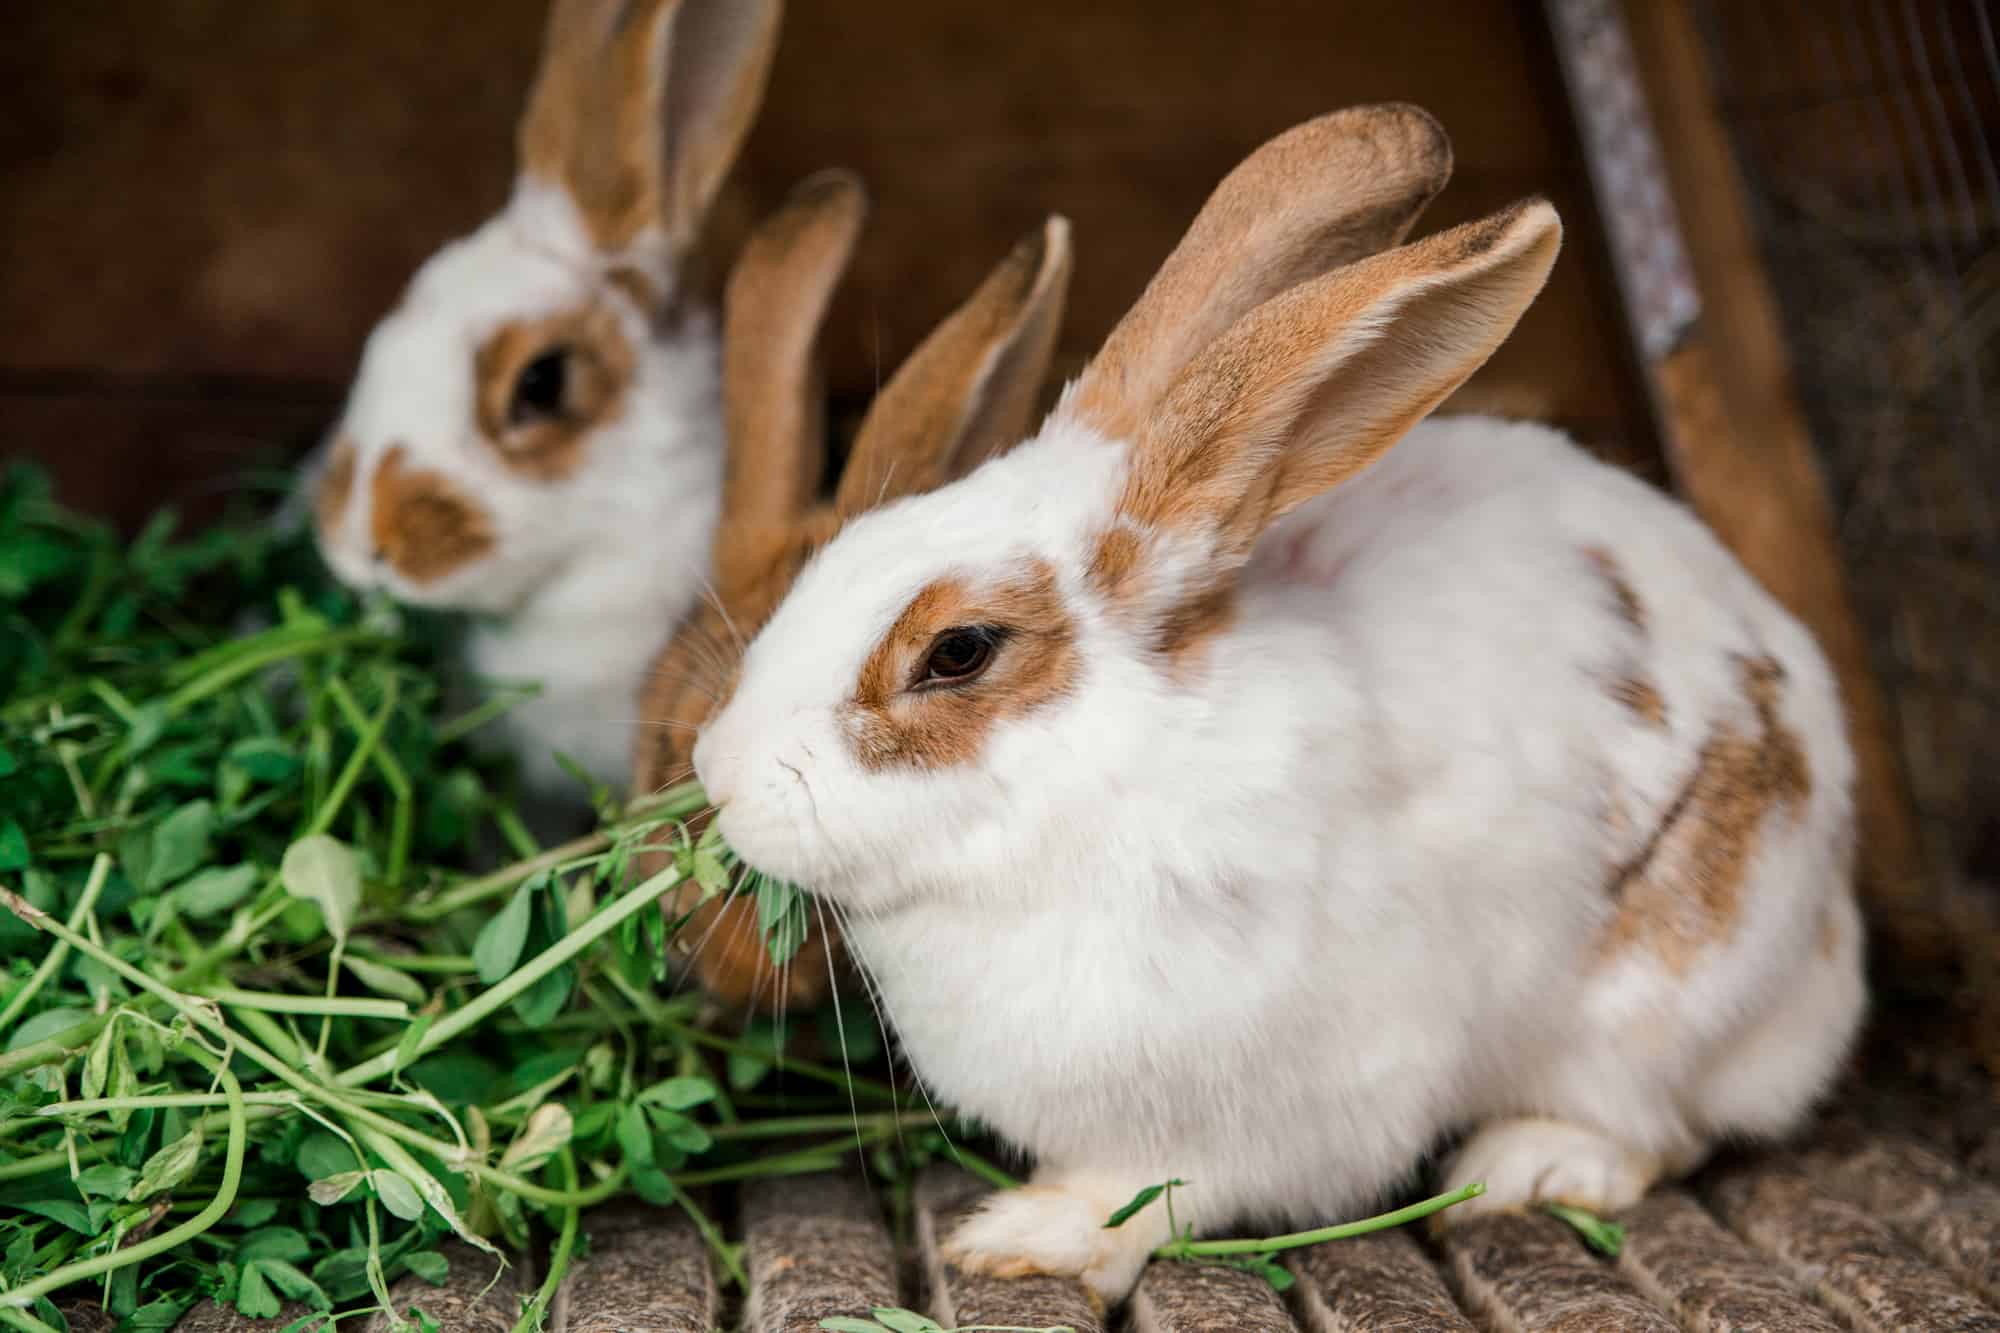 What Is The Best Way To Store Your Rabbit's Food